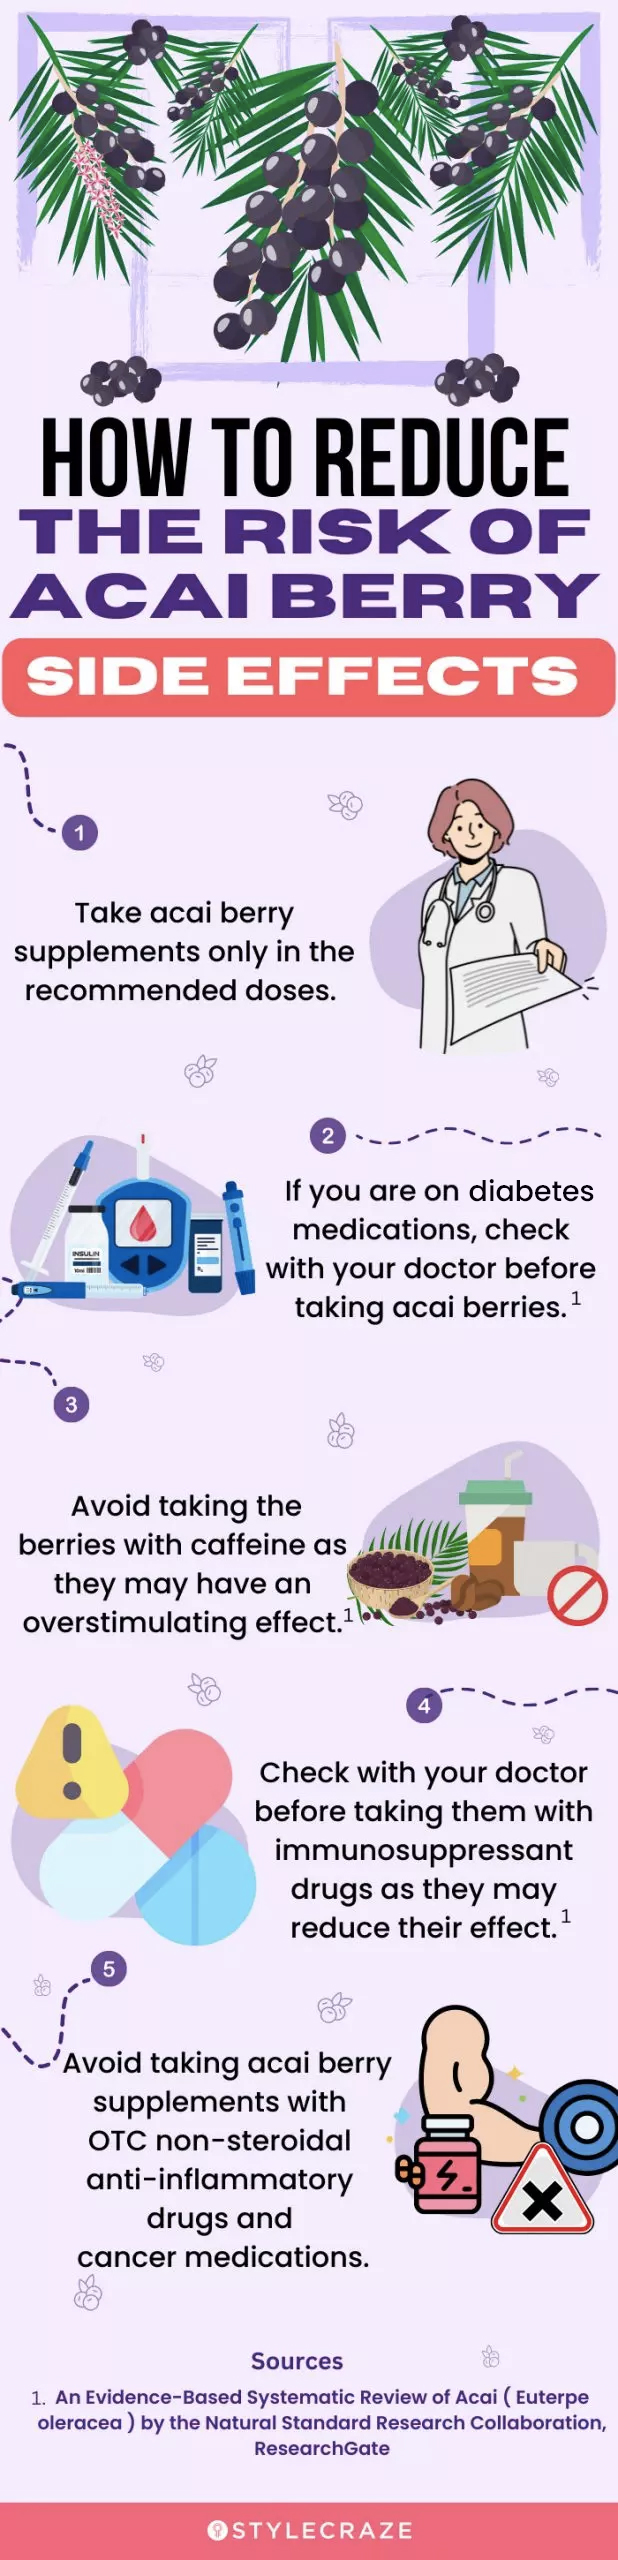 how to reduce the risk of acai berry side effects (infographic)